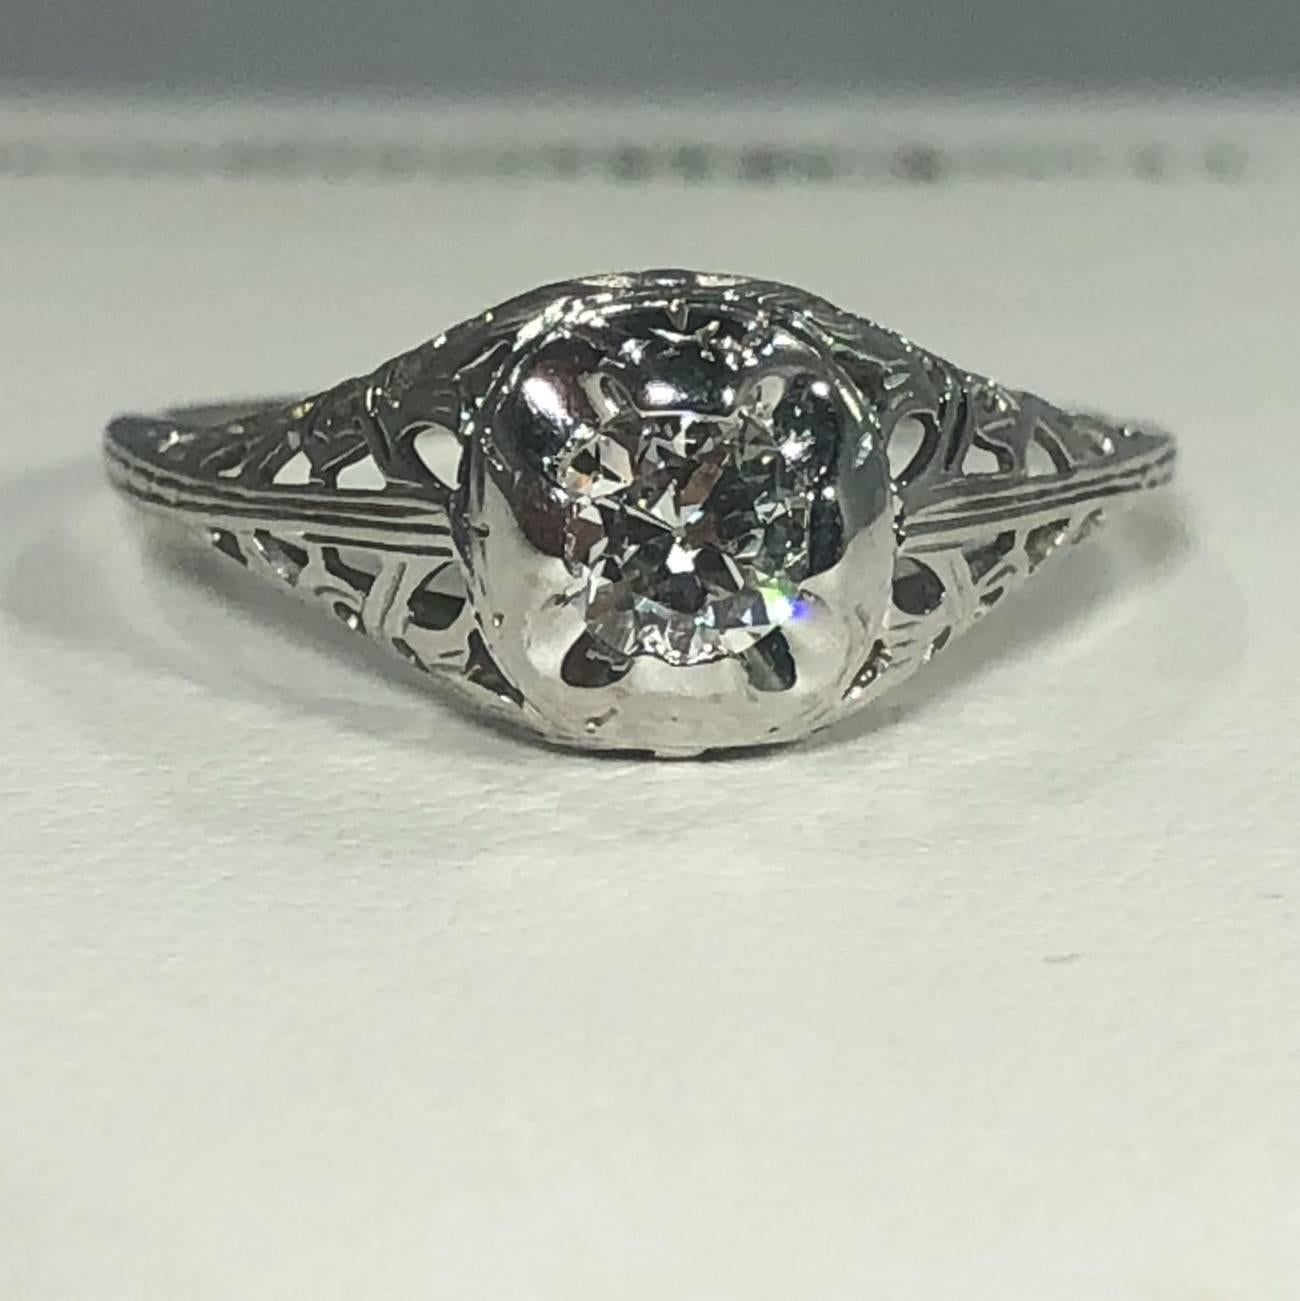 Art Deco 18 karat and old European cut diamond solitaire engagement ring. This is a true antique Art Deco ring, Circa 1925. This piece is created in 18 karat white gold, beautiful cut out filigree design, weighing 1.7 grams, 1.1 DWT. The center